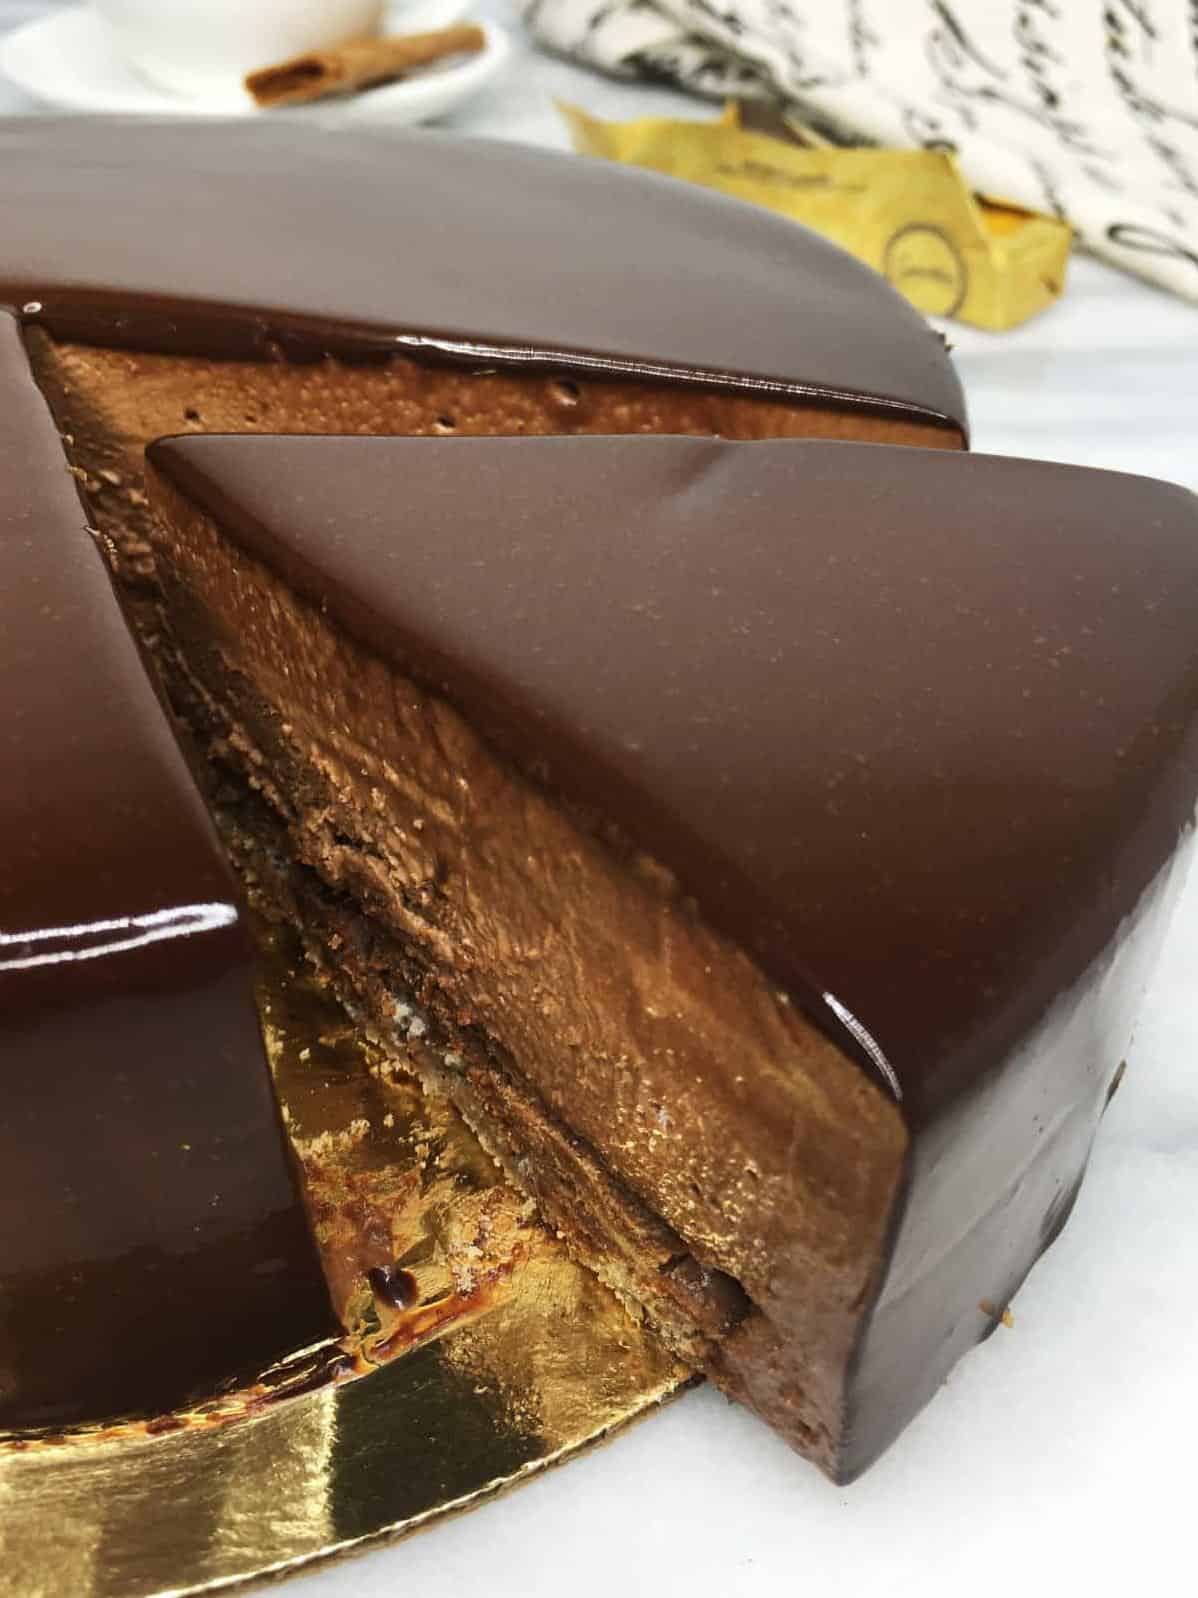  Chocolatey goodness in every layer!